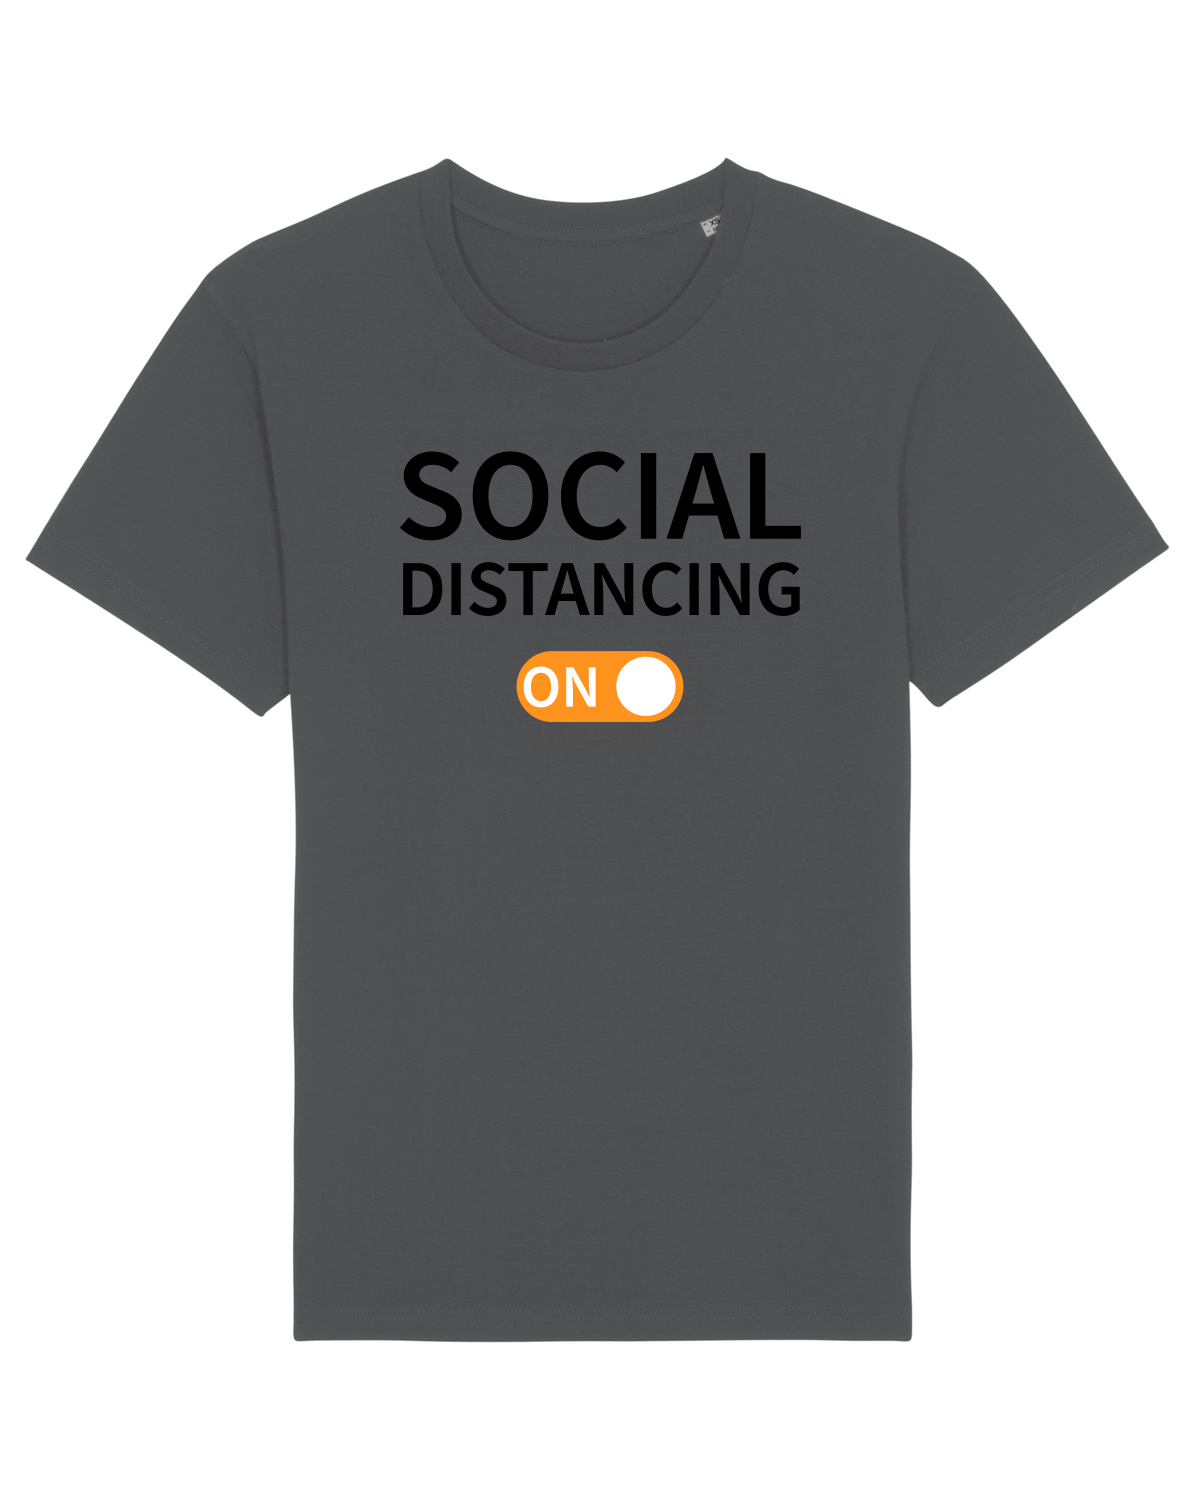 Social Distancing ON